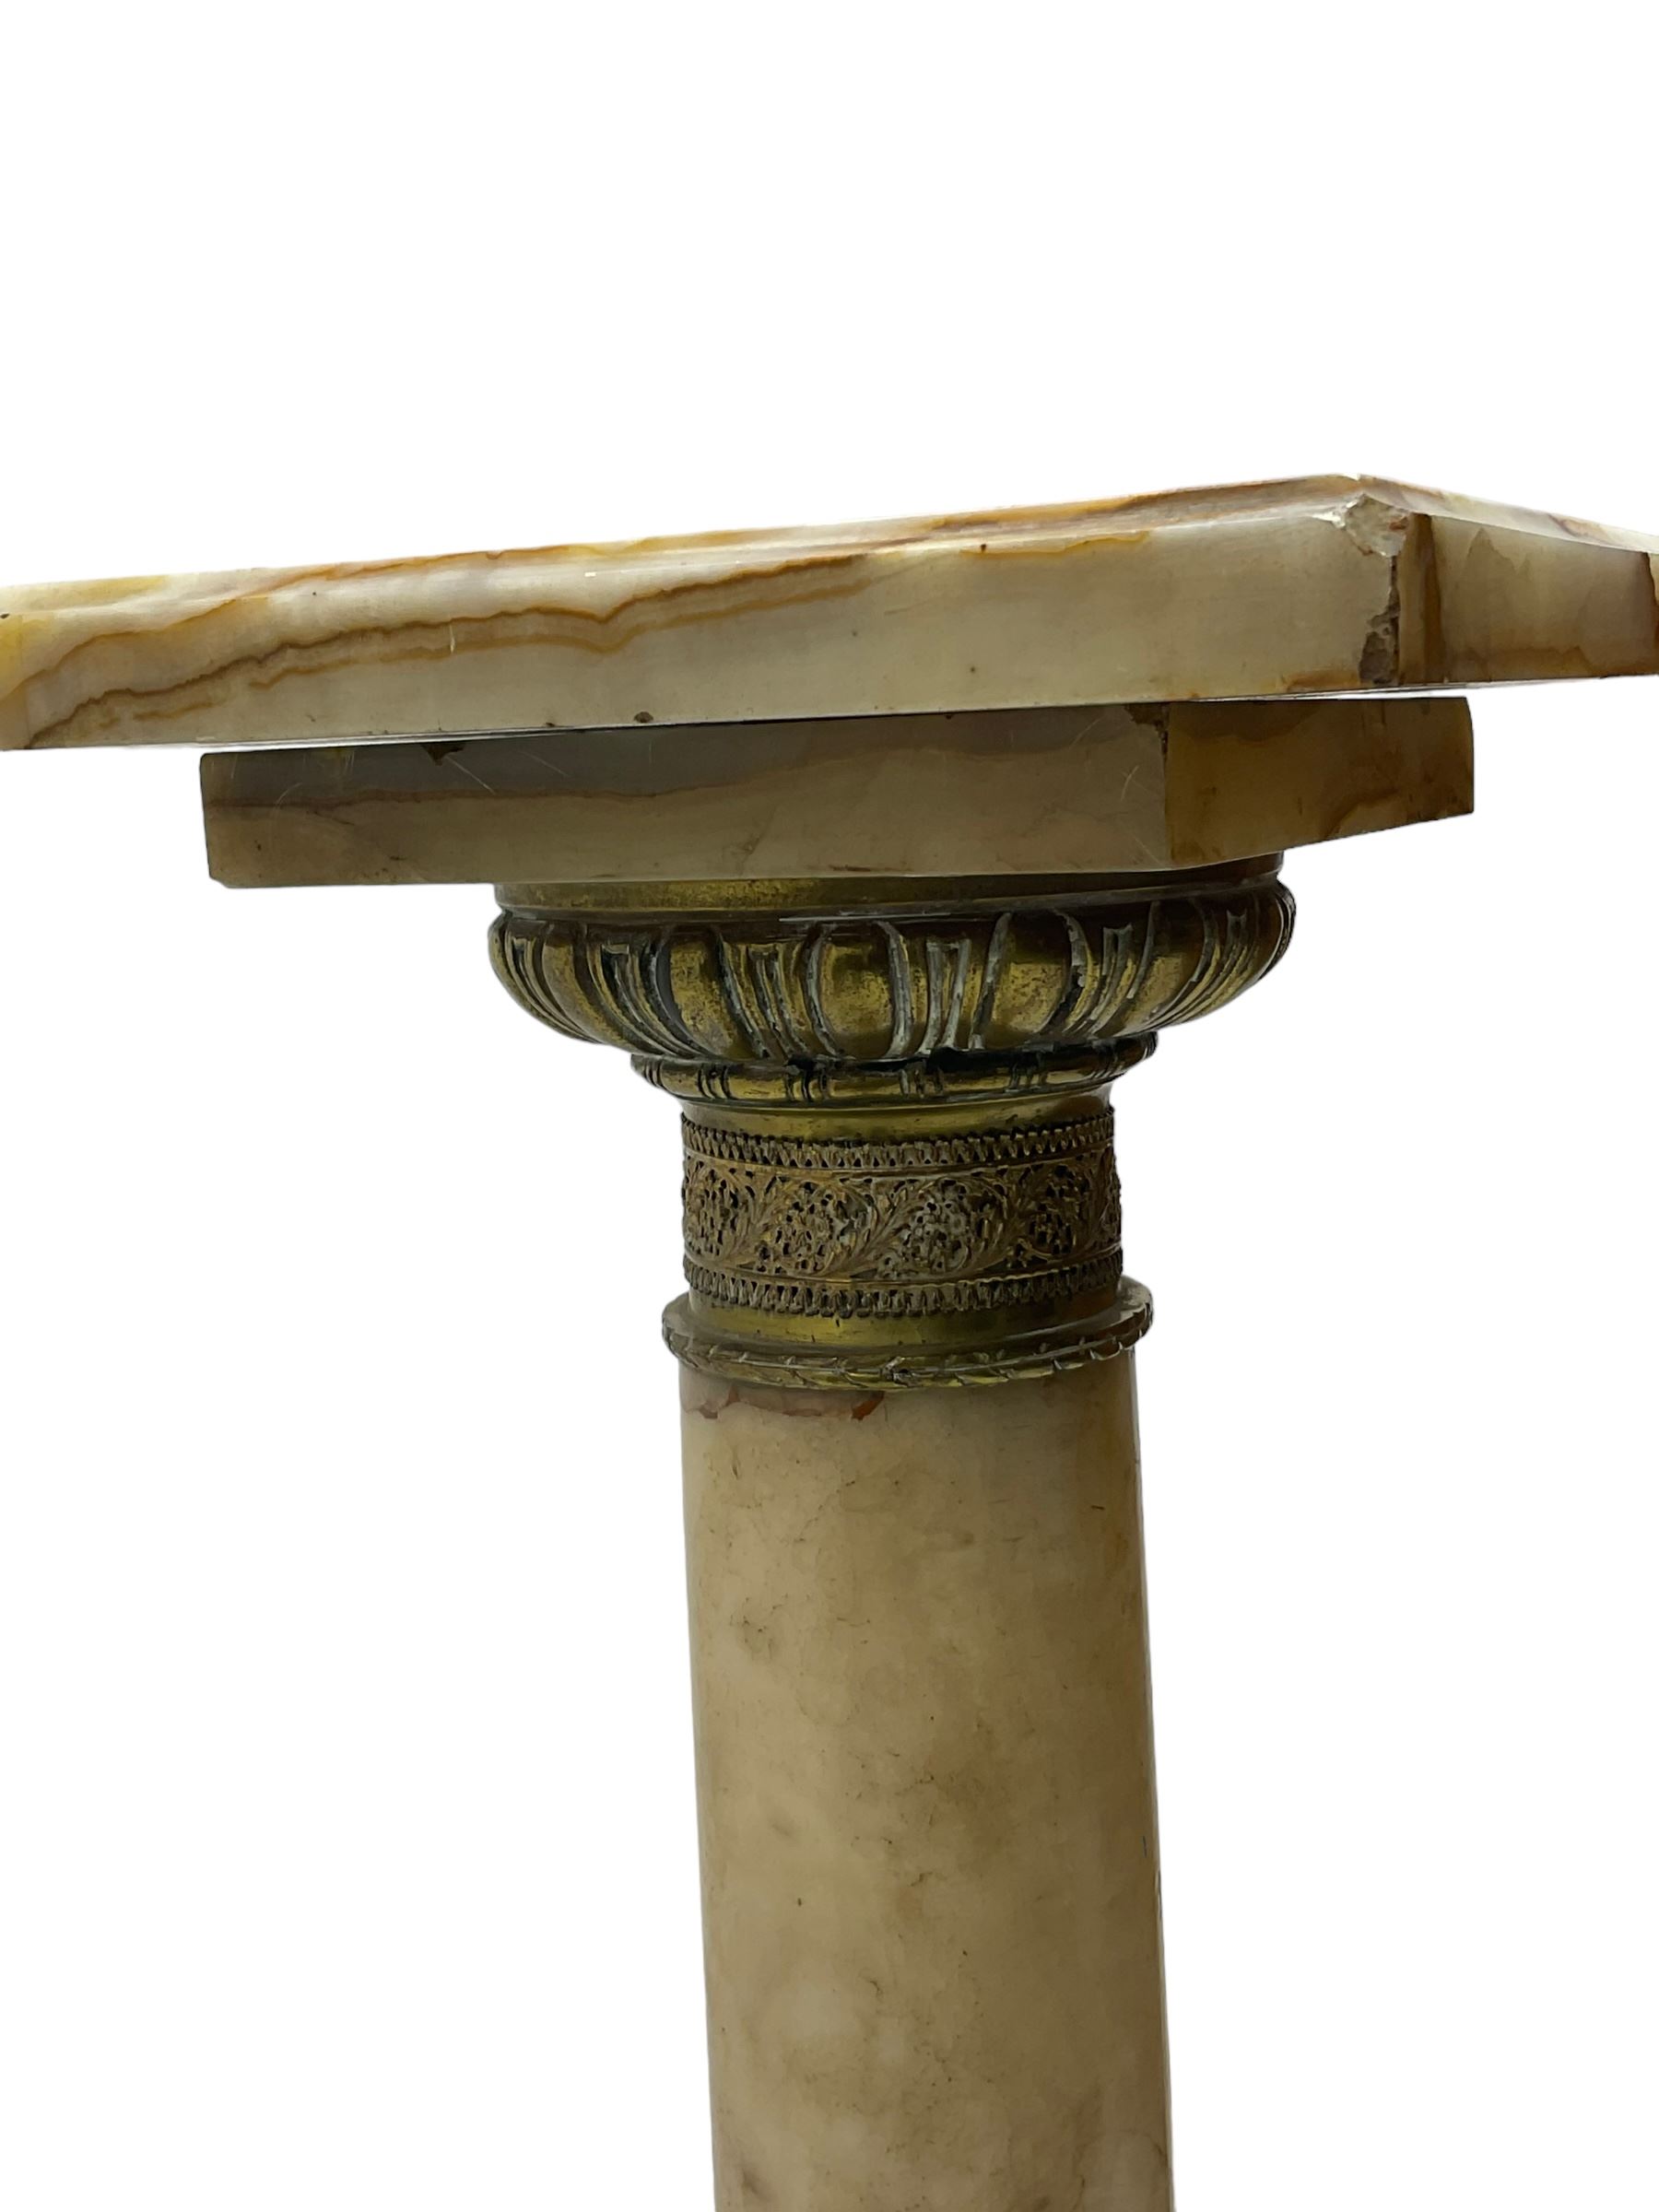 Late 19th century variegated marble torchère or plant stand - Image 7 of 7